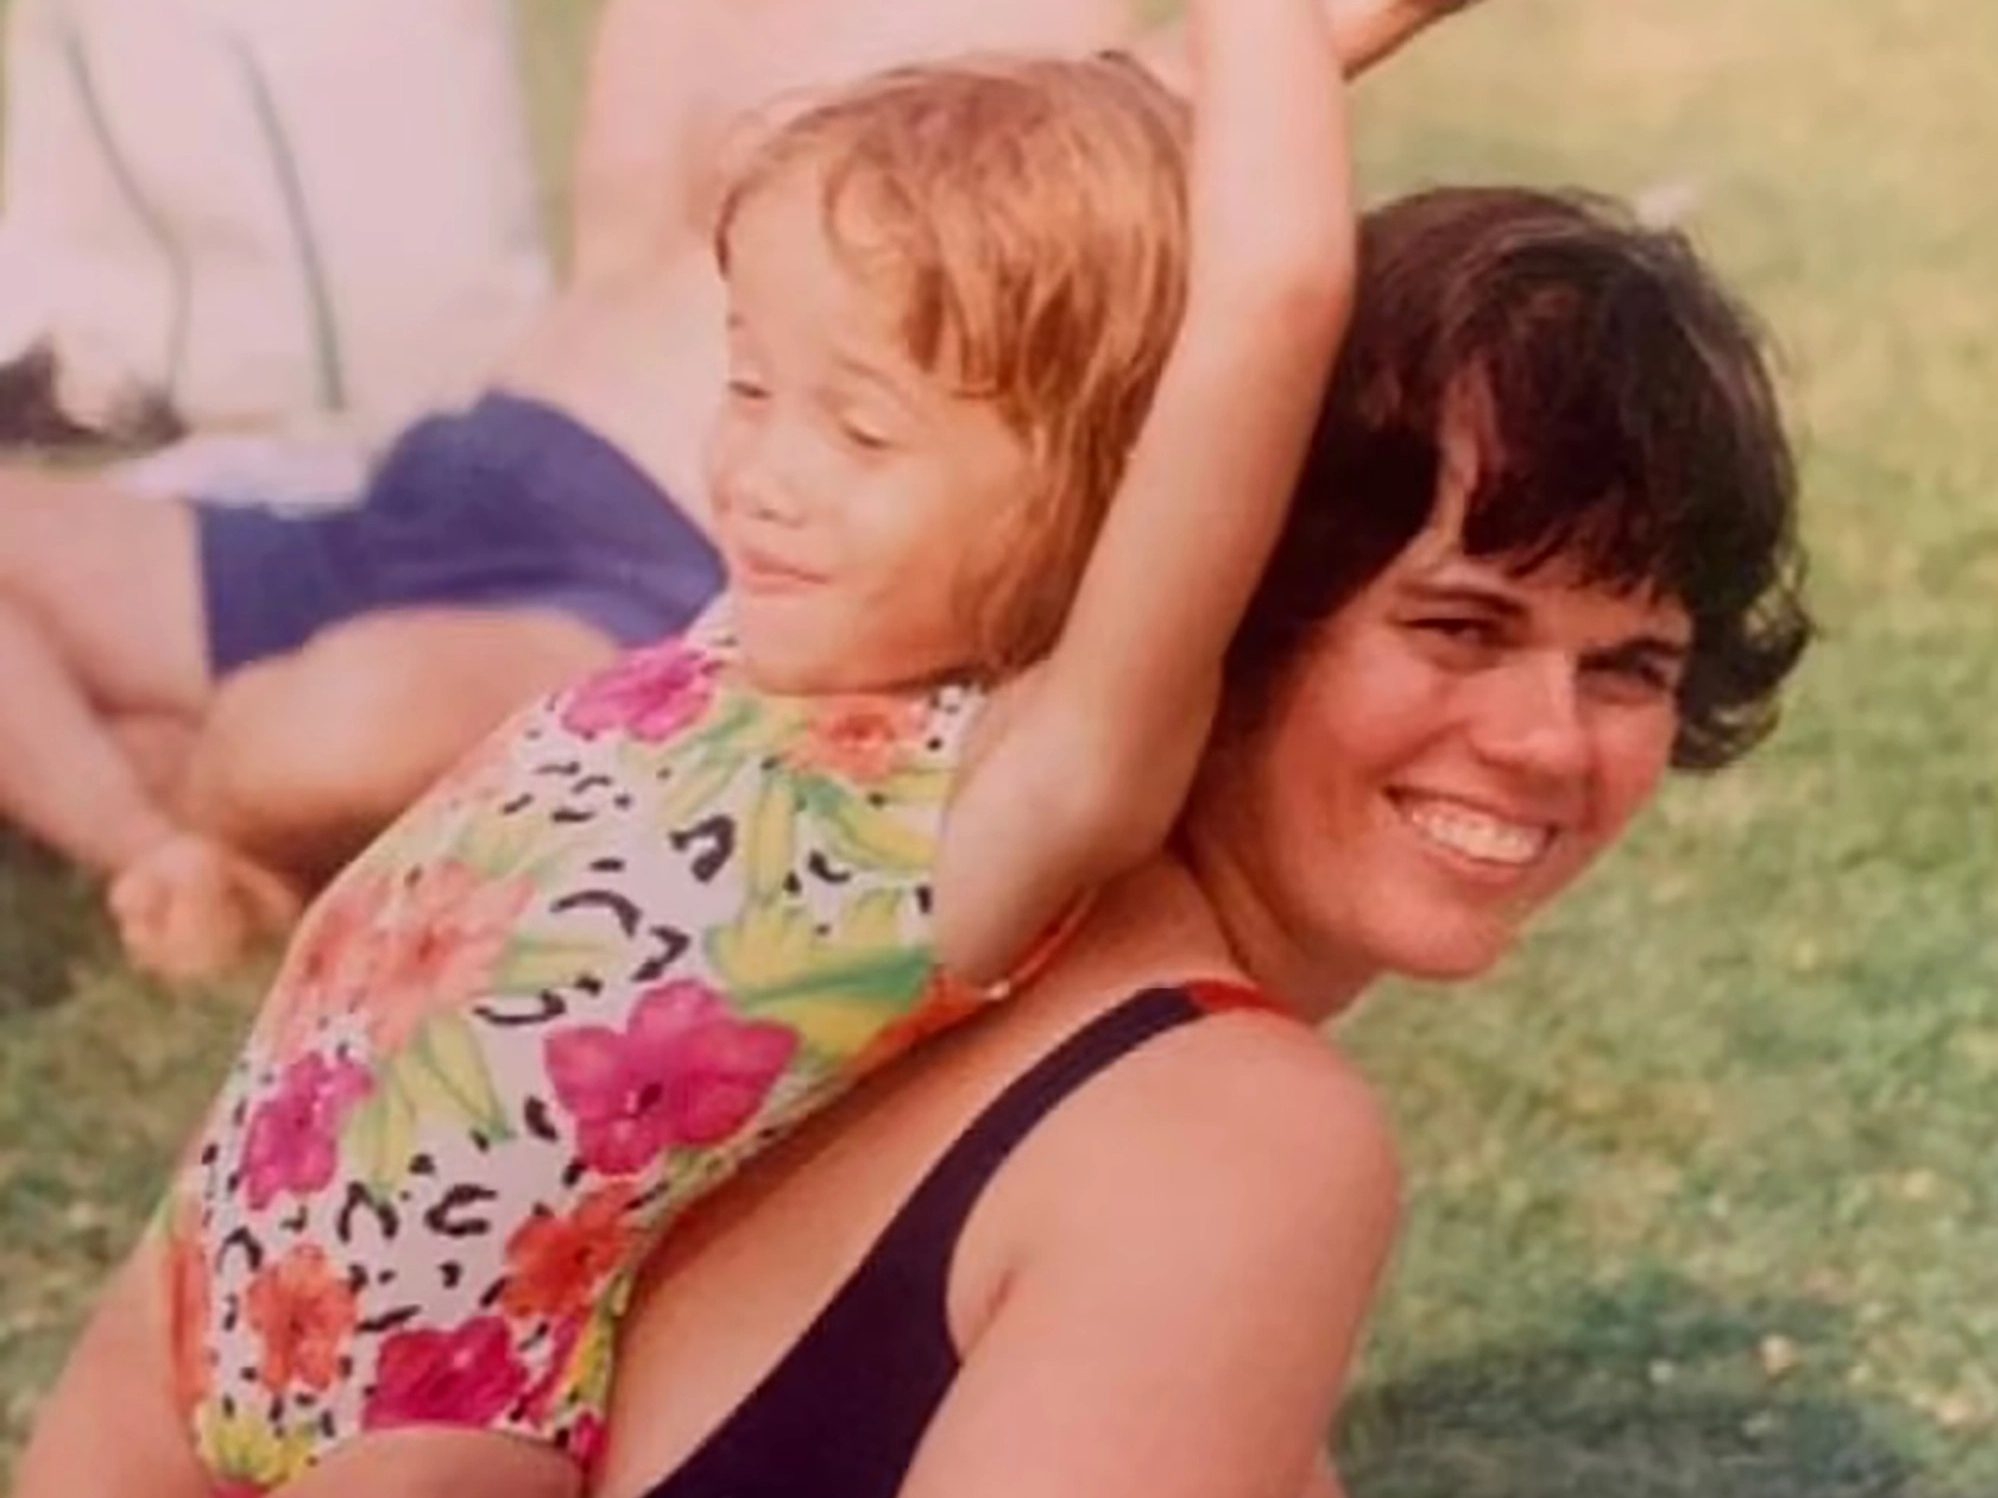 Writer brings readers to tears with heartfelt, hilarious obit for mom